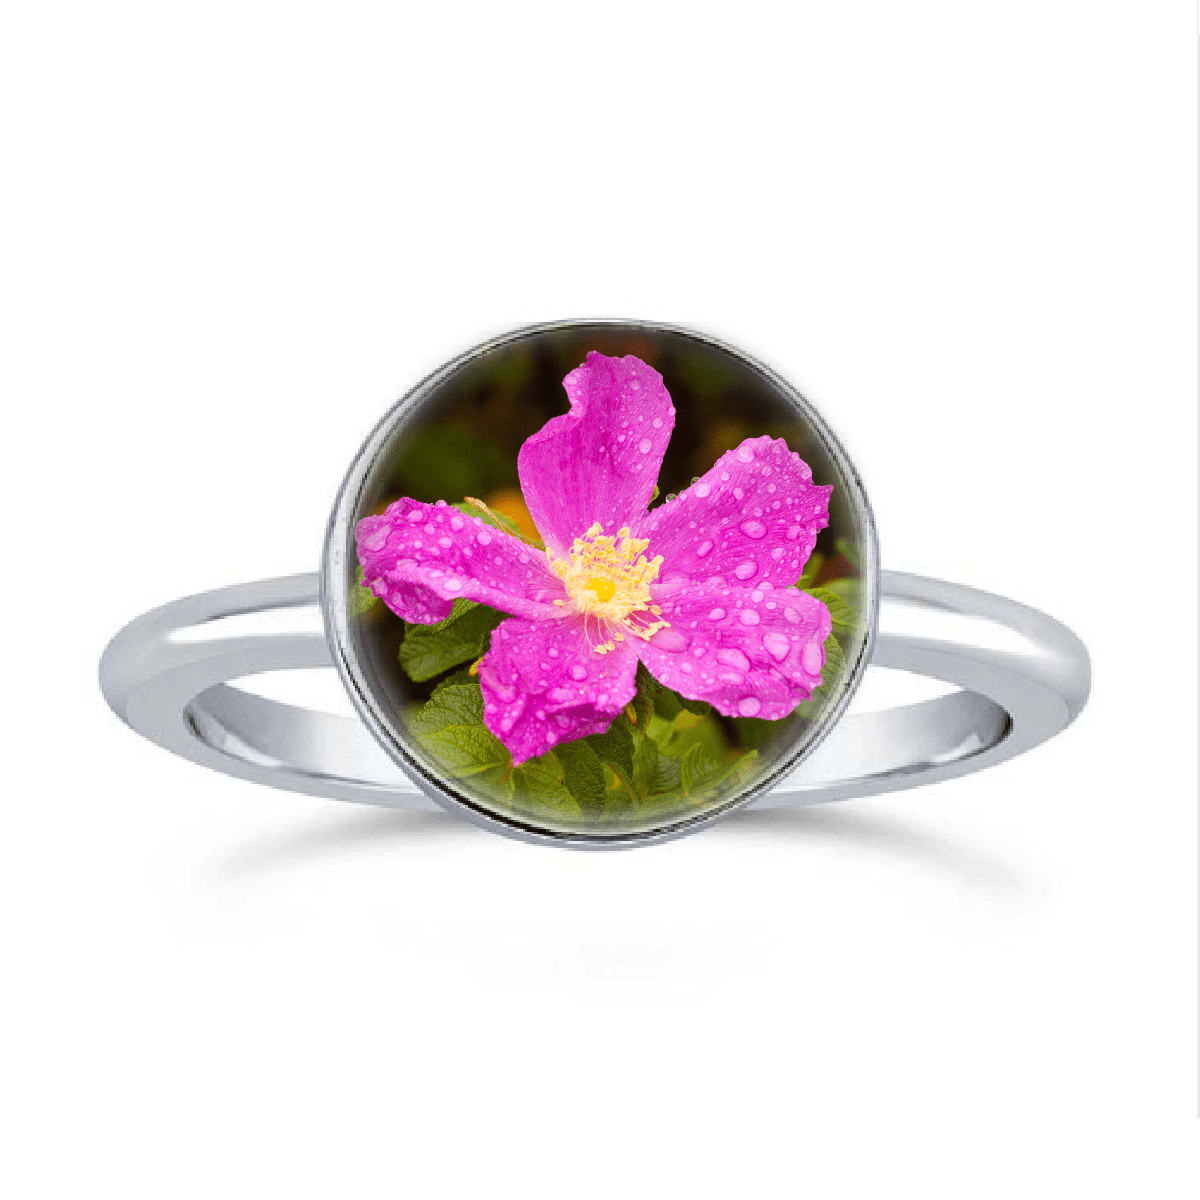 Colorful Floral Ring by Heather Mladek